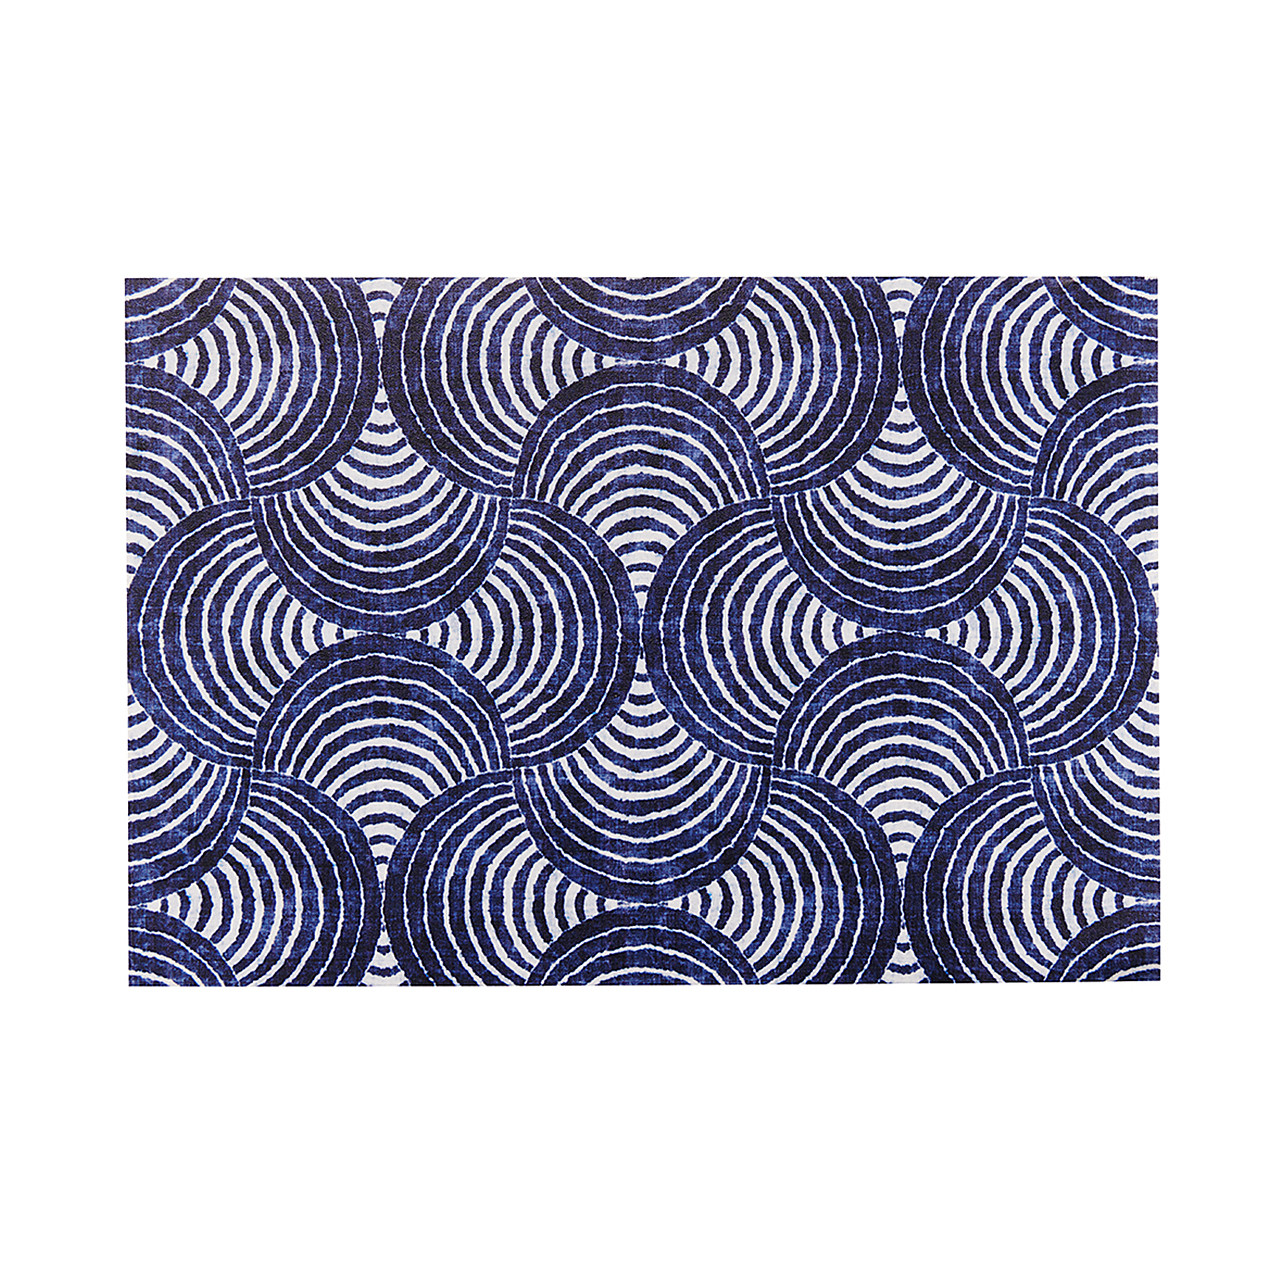 13 x 19 in. Blue Waves Placemat